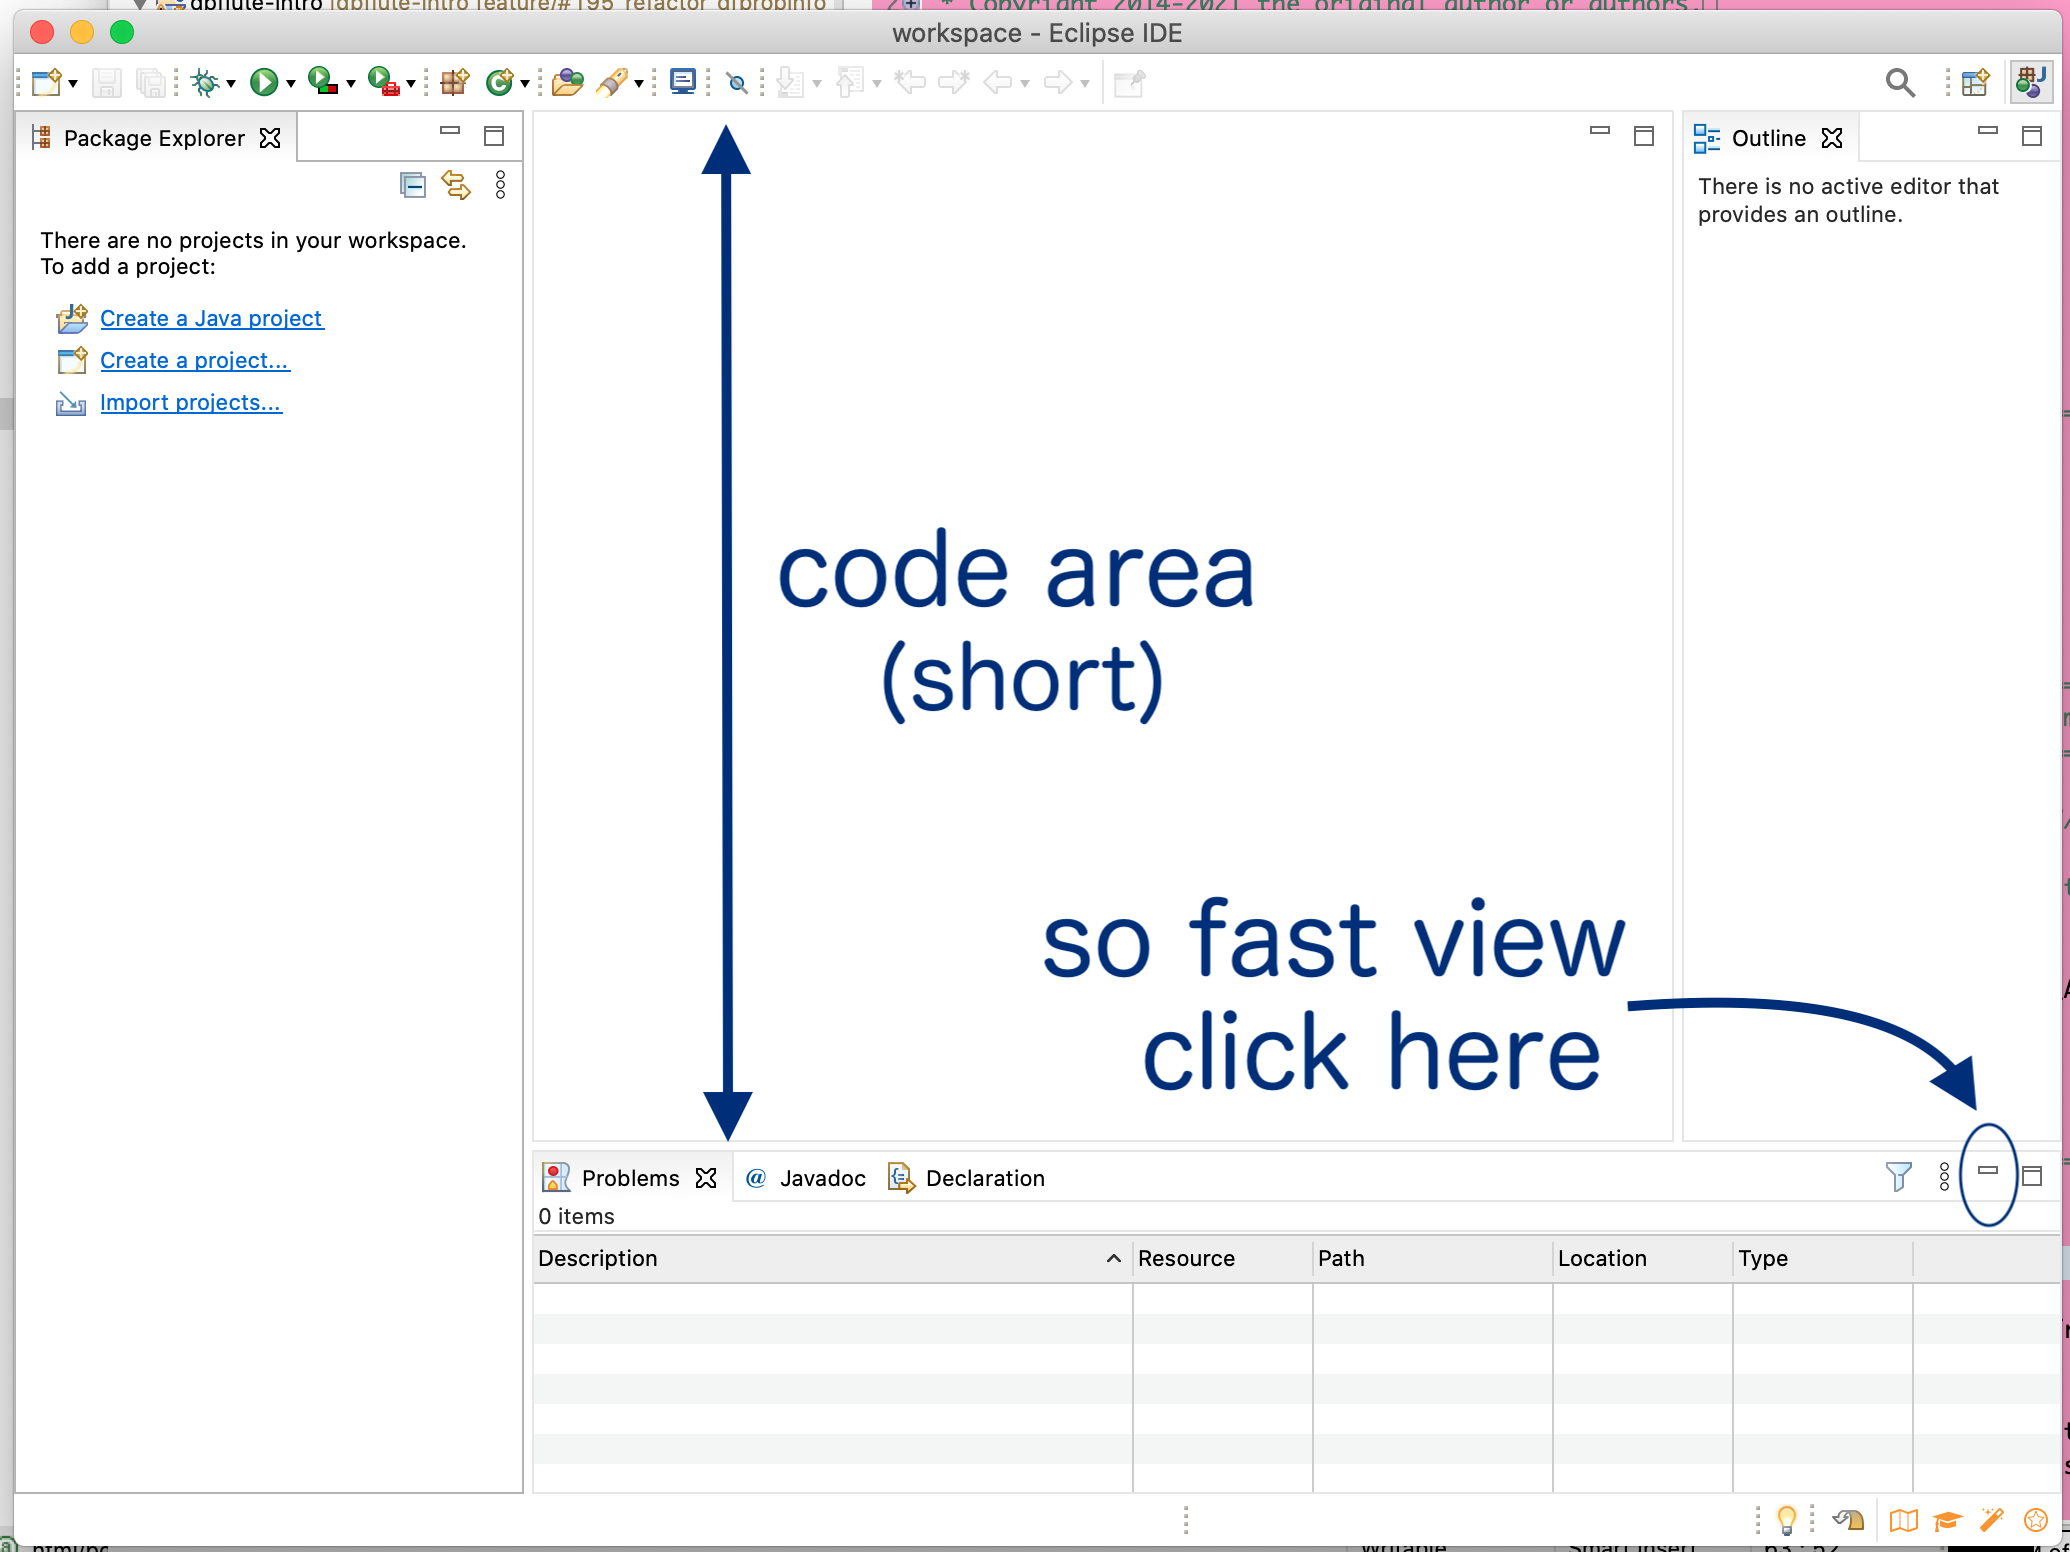 Eclipse ViewLocation short code-area so fast-view